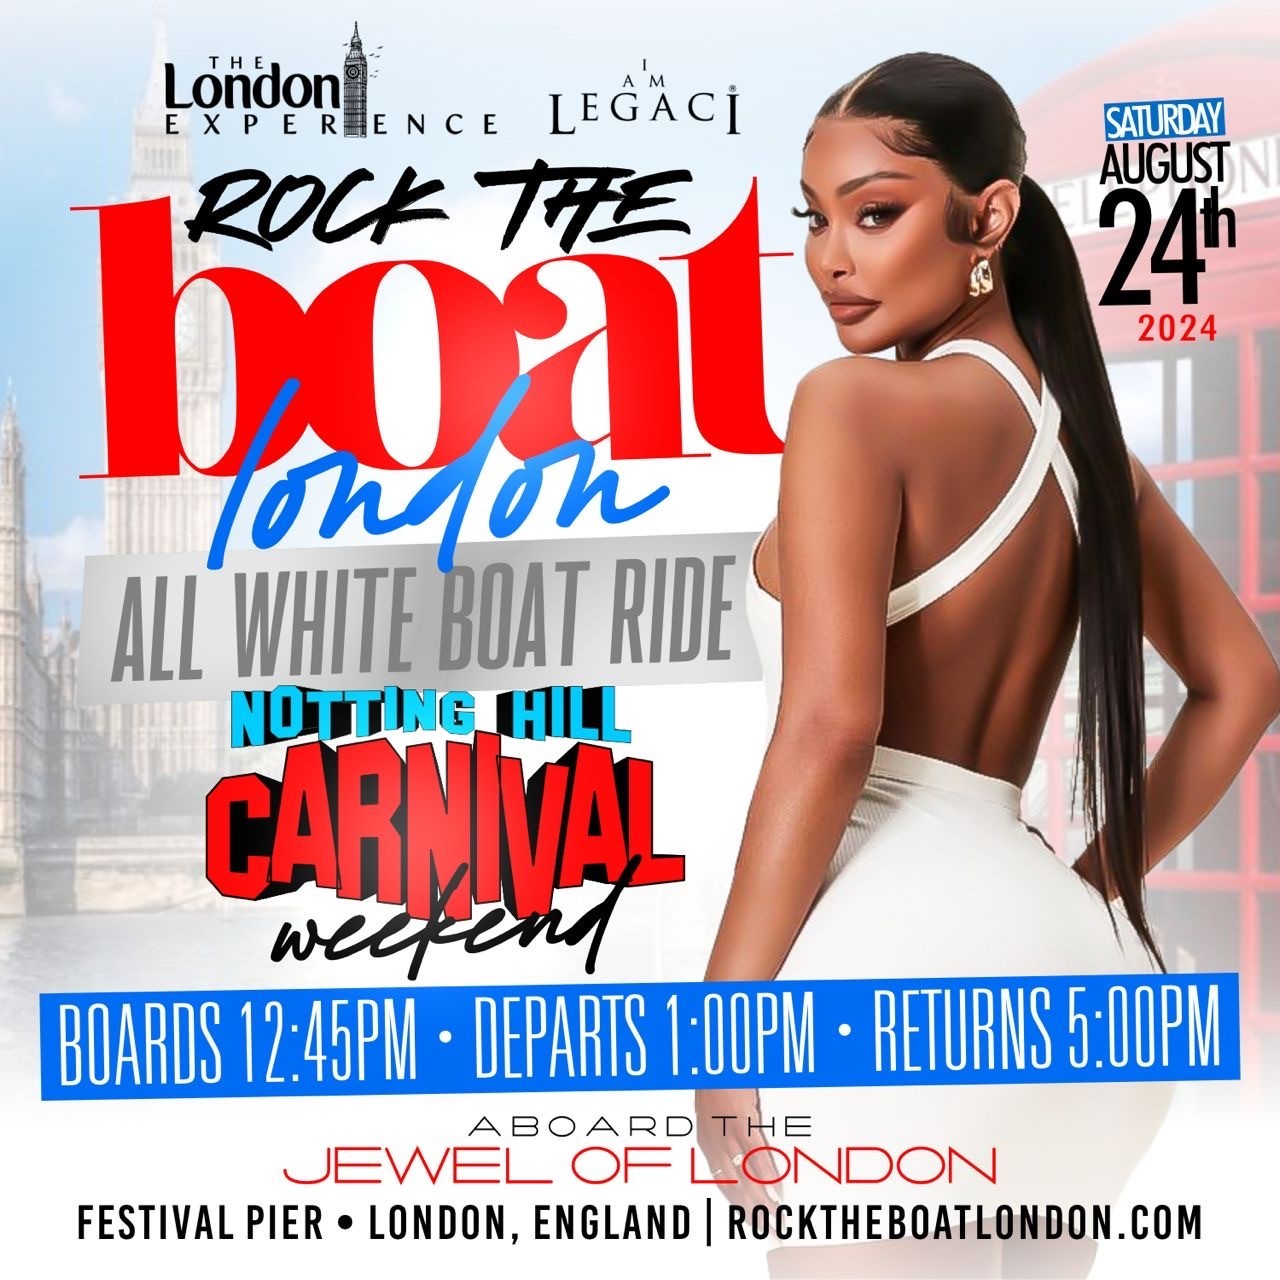 ROCK THE BOAT LONDON ALL WHITE BOAT RIDE PARTY | NOTTING HILL CARNIVAL 2024 ROCK THE BOAT LONDON ALL WHITE BOAT RIDE PARTY | NOTTING HILL CARNIVAL 2024 on Aug 24, 12:45@Jewel of London - Buy tickets and Get information on www.fetefinders.com tickets.fetefinders.com